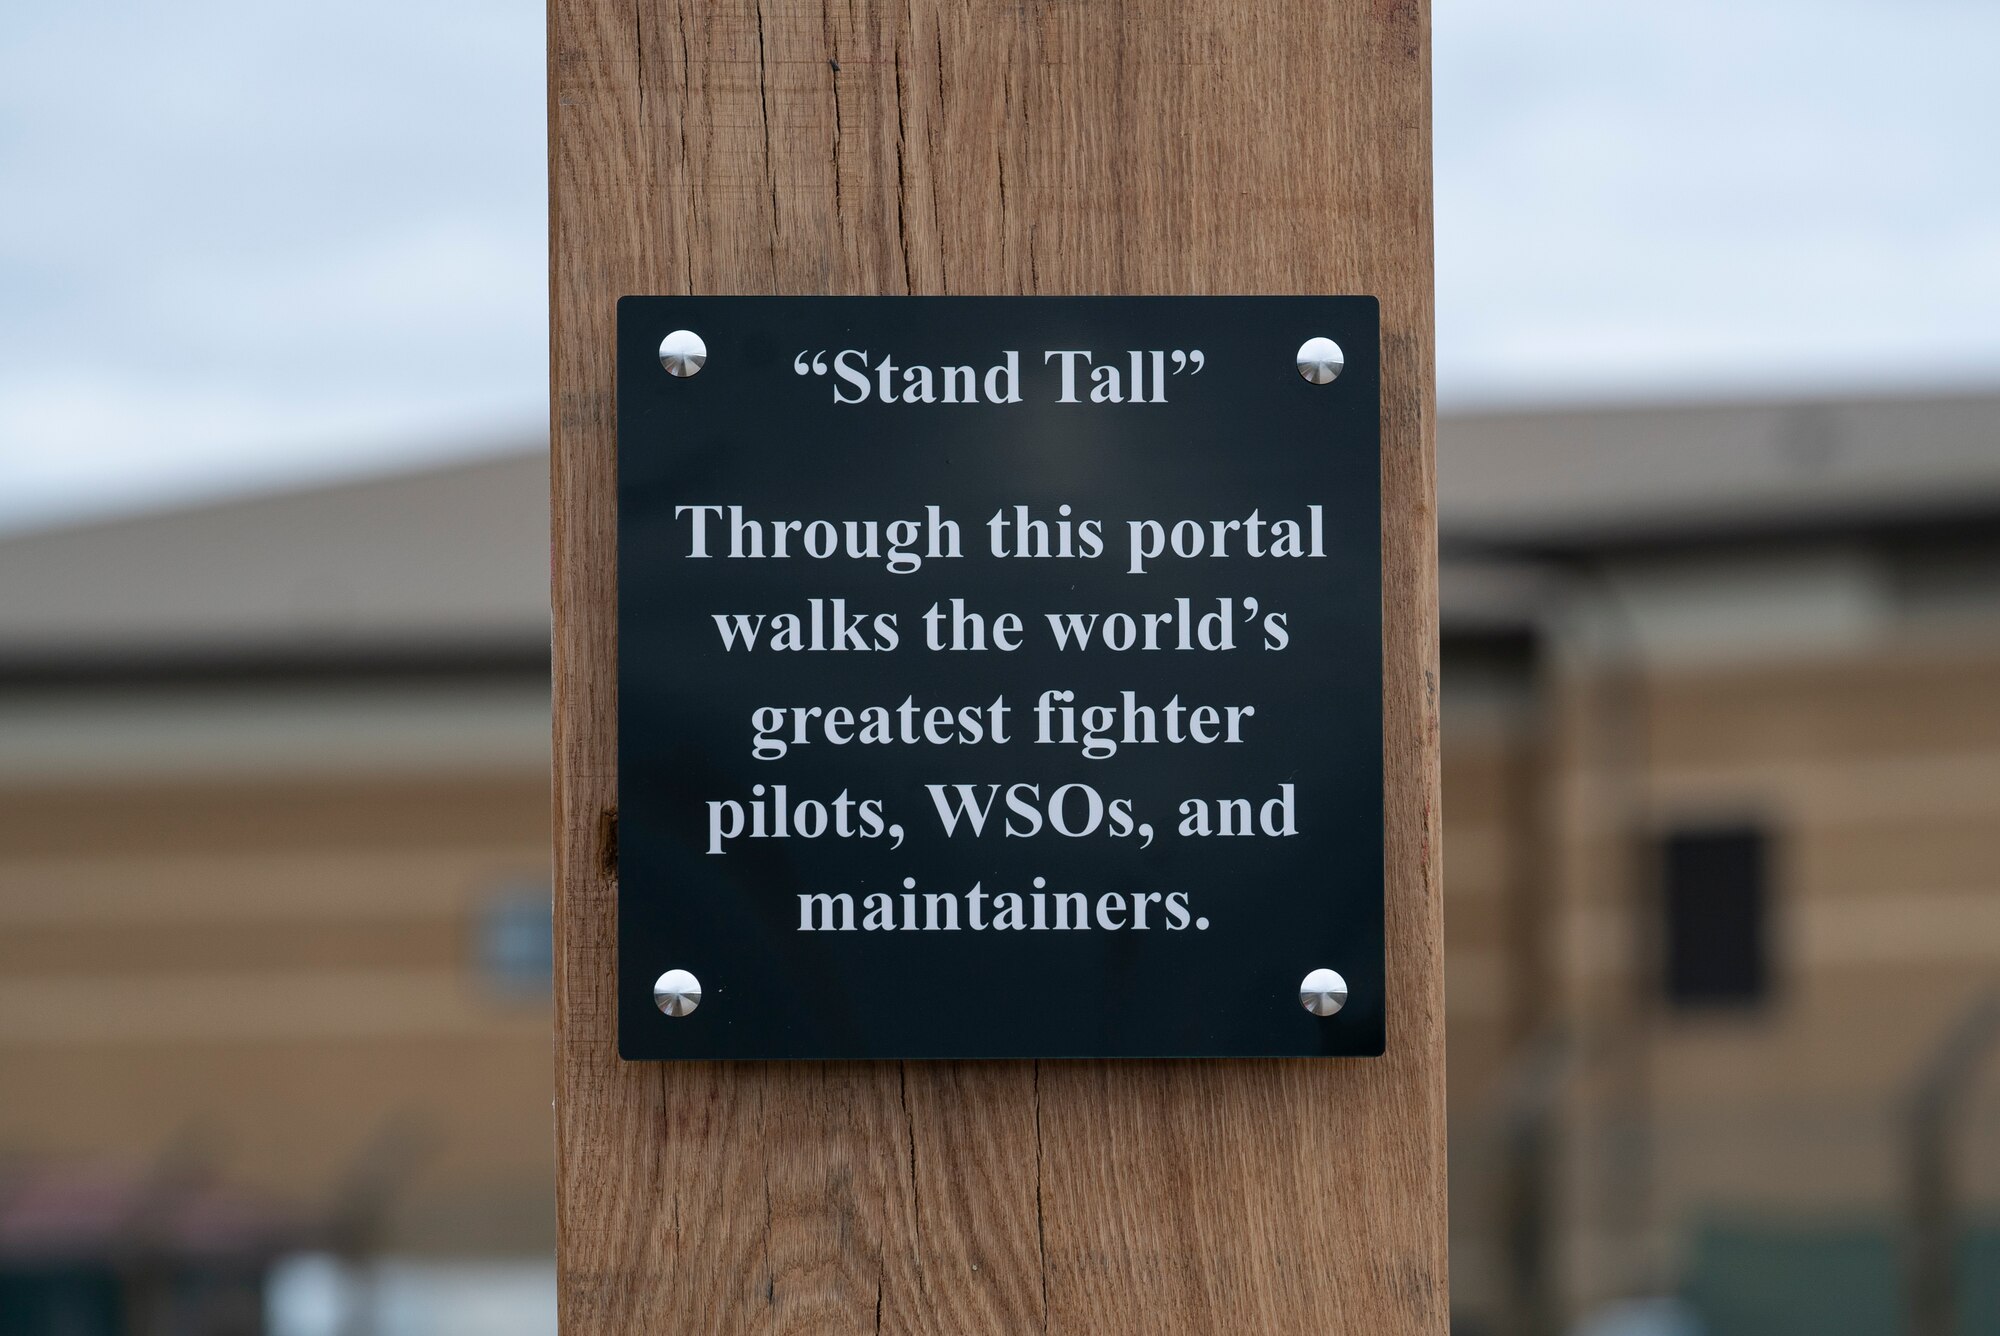 One of six plaques that adorns the new heritage arch at Royal Air Force Lakenheath, England, March 6, 2021. Eight museum panels adorn the support beams, containing inspirational words and showcasing stories of  48th Fighter Wing history and Air Force culture. (U.S. Air Force photo by Airman 1st Class Jessi Monte)